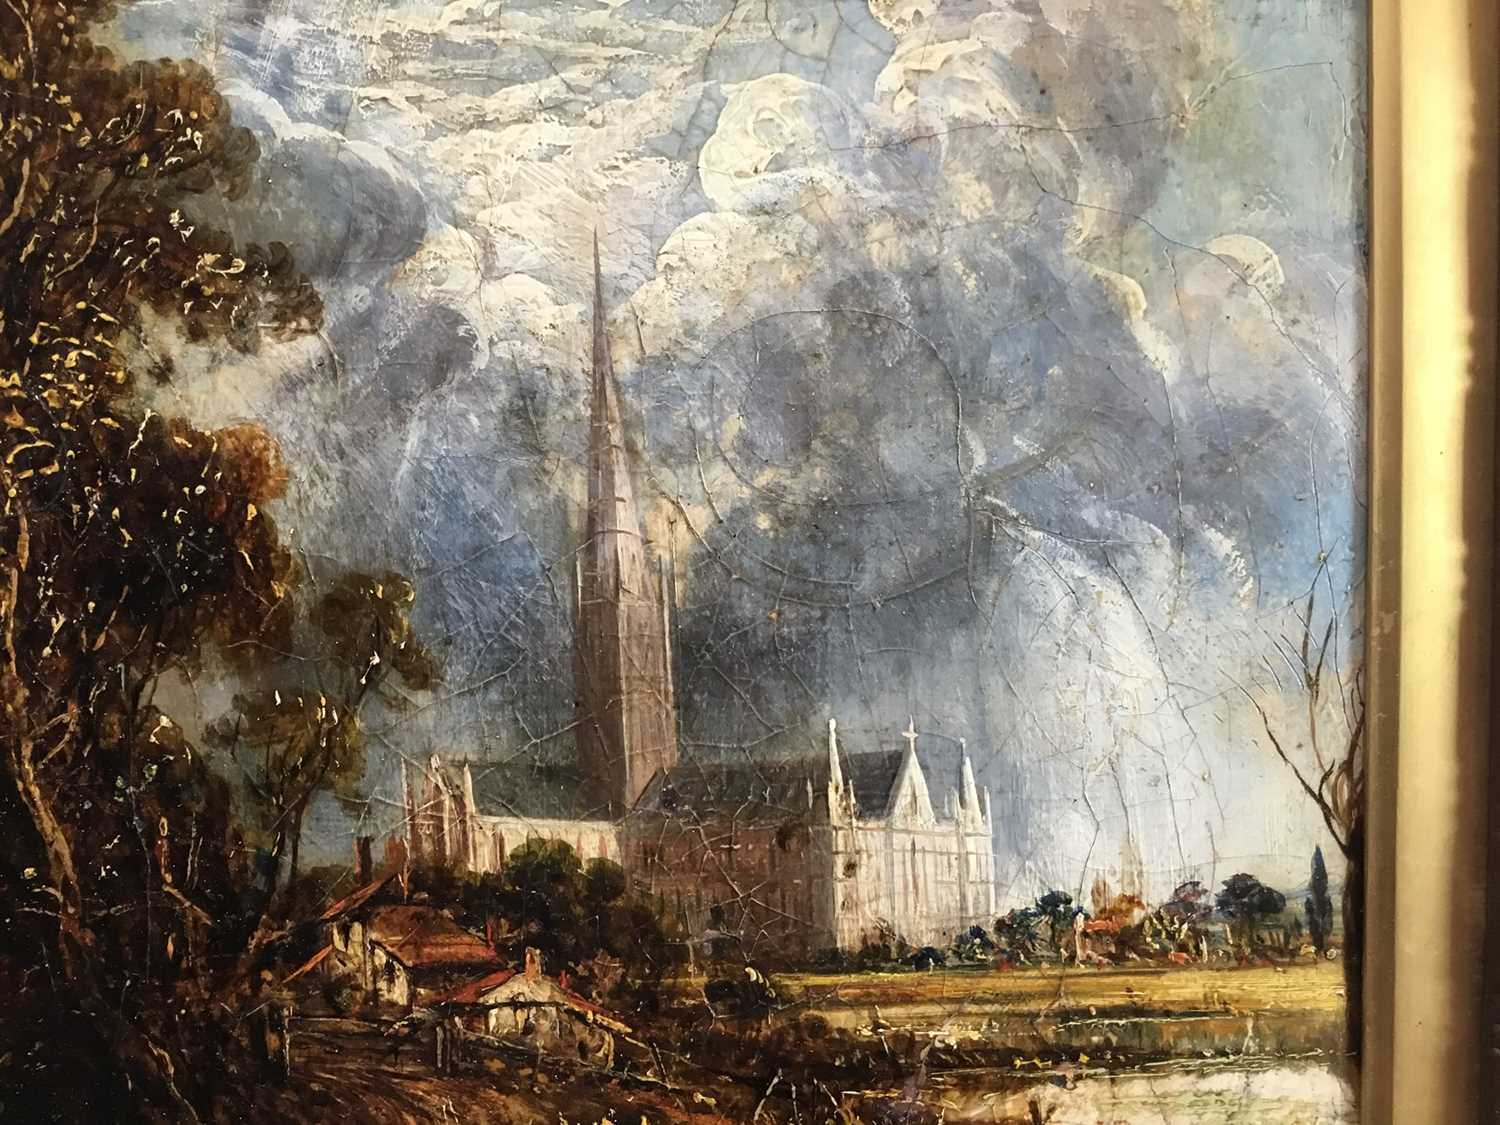 Joseph Paul oil on canvas, Salisbury Cathedral after John Constable - Image 6 of 9